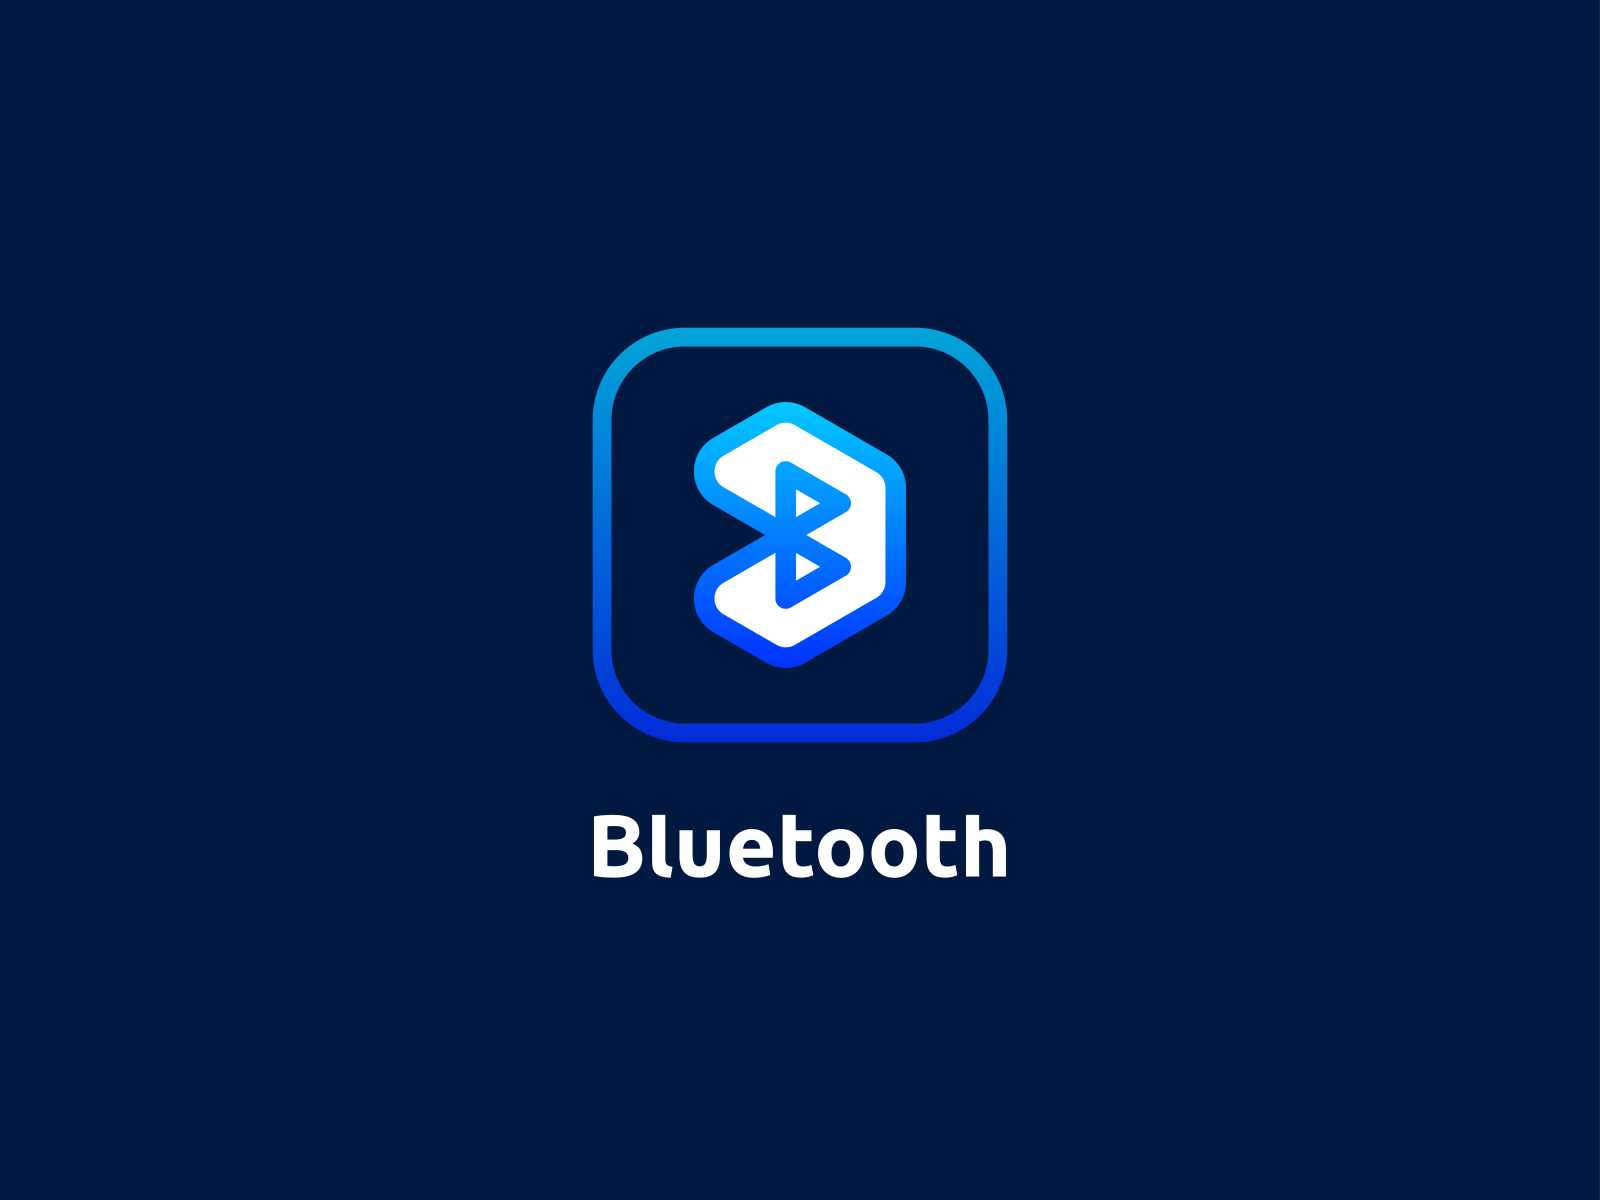 Redesign - Bluetooth Logo by Sanaullah Ujjal on Dribbble